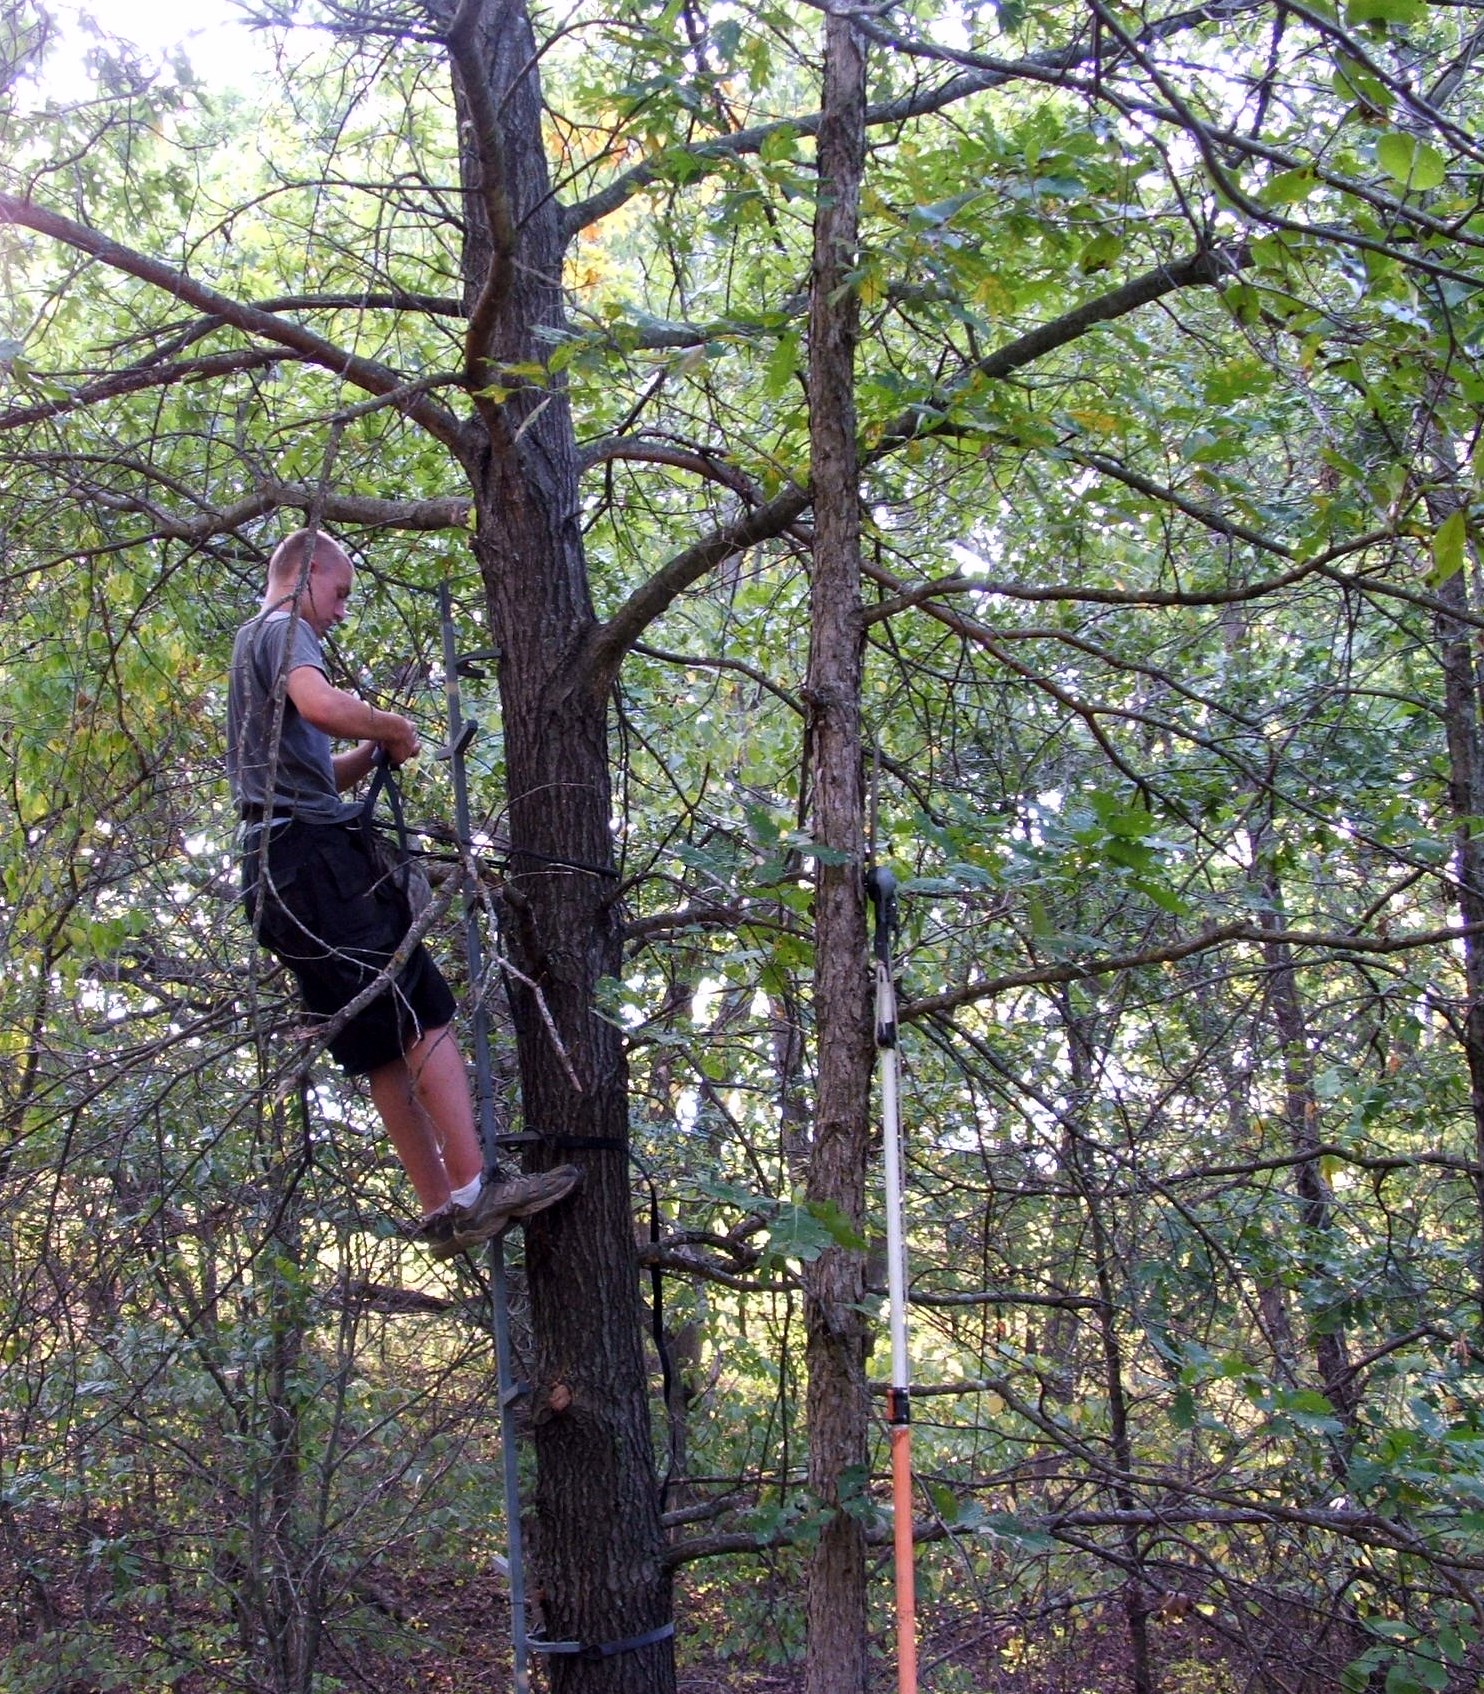 September is a great time to do stand maintenance.  Safety line systems can be installed, additional strapping added, and of course limbing out some regrowth with our shooting lanes.  Don't be afraid to do this now...it is better to make some small intrusions into your sets now than to miss an opportunity at a shot later in the season.